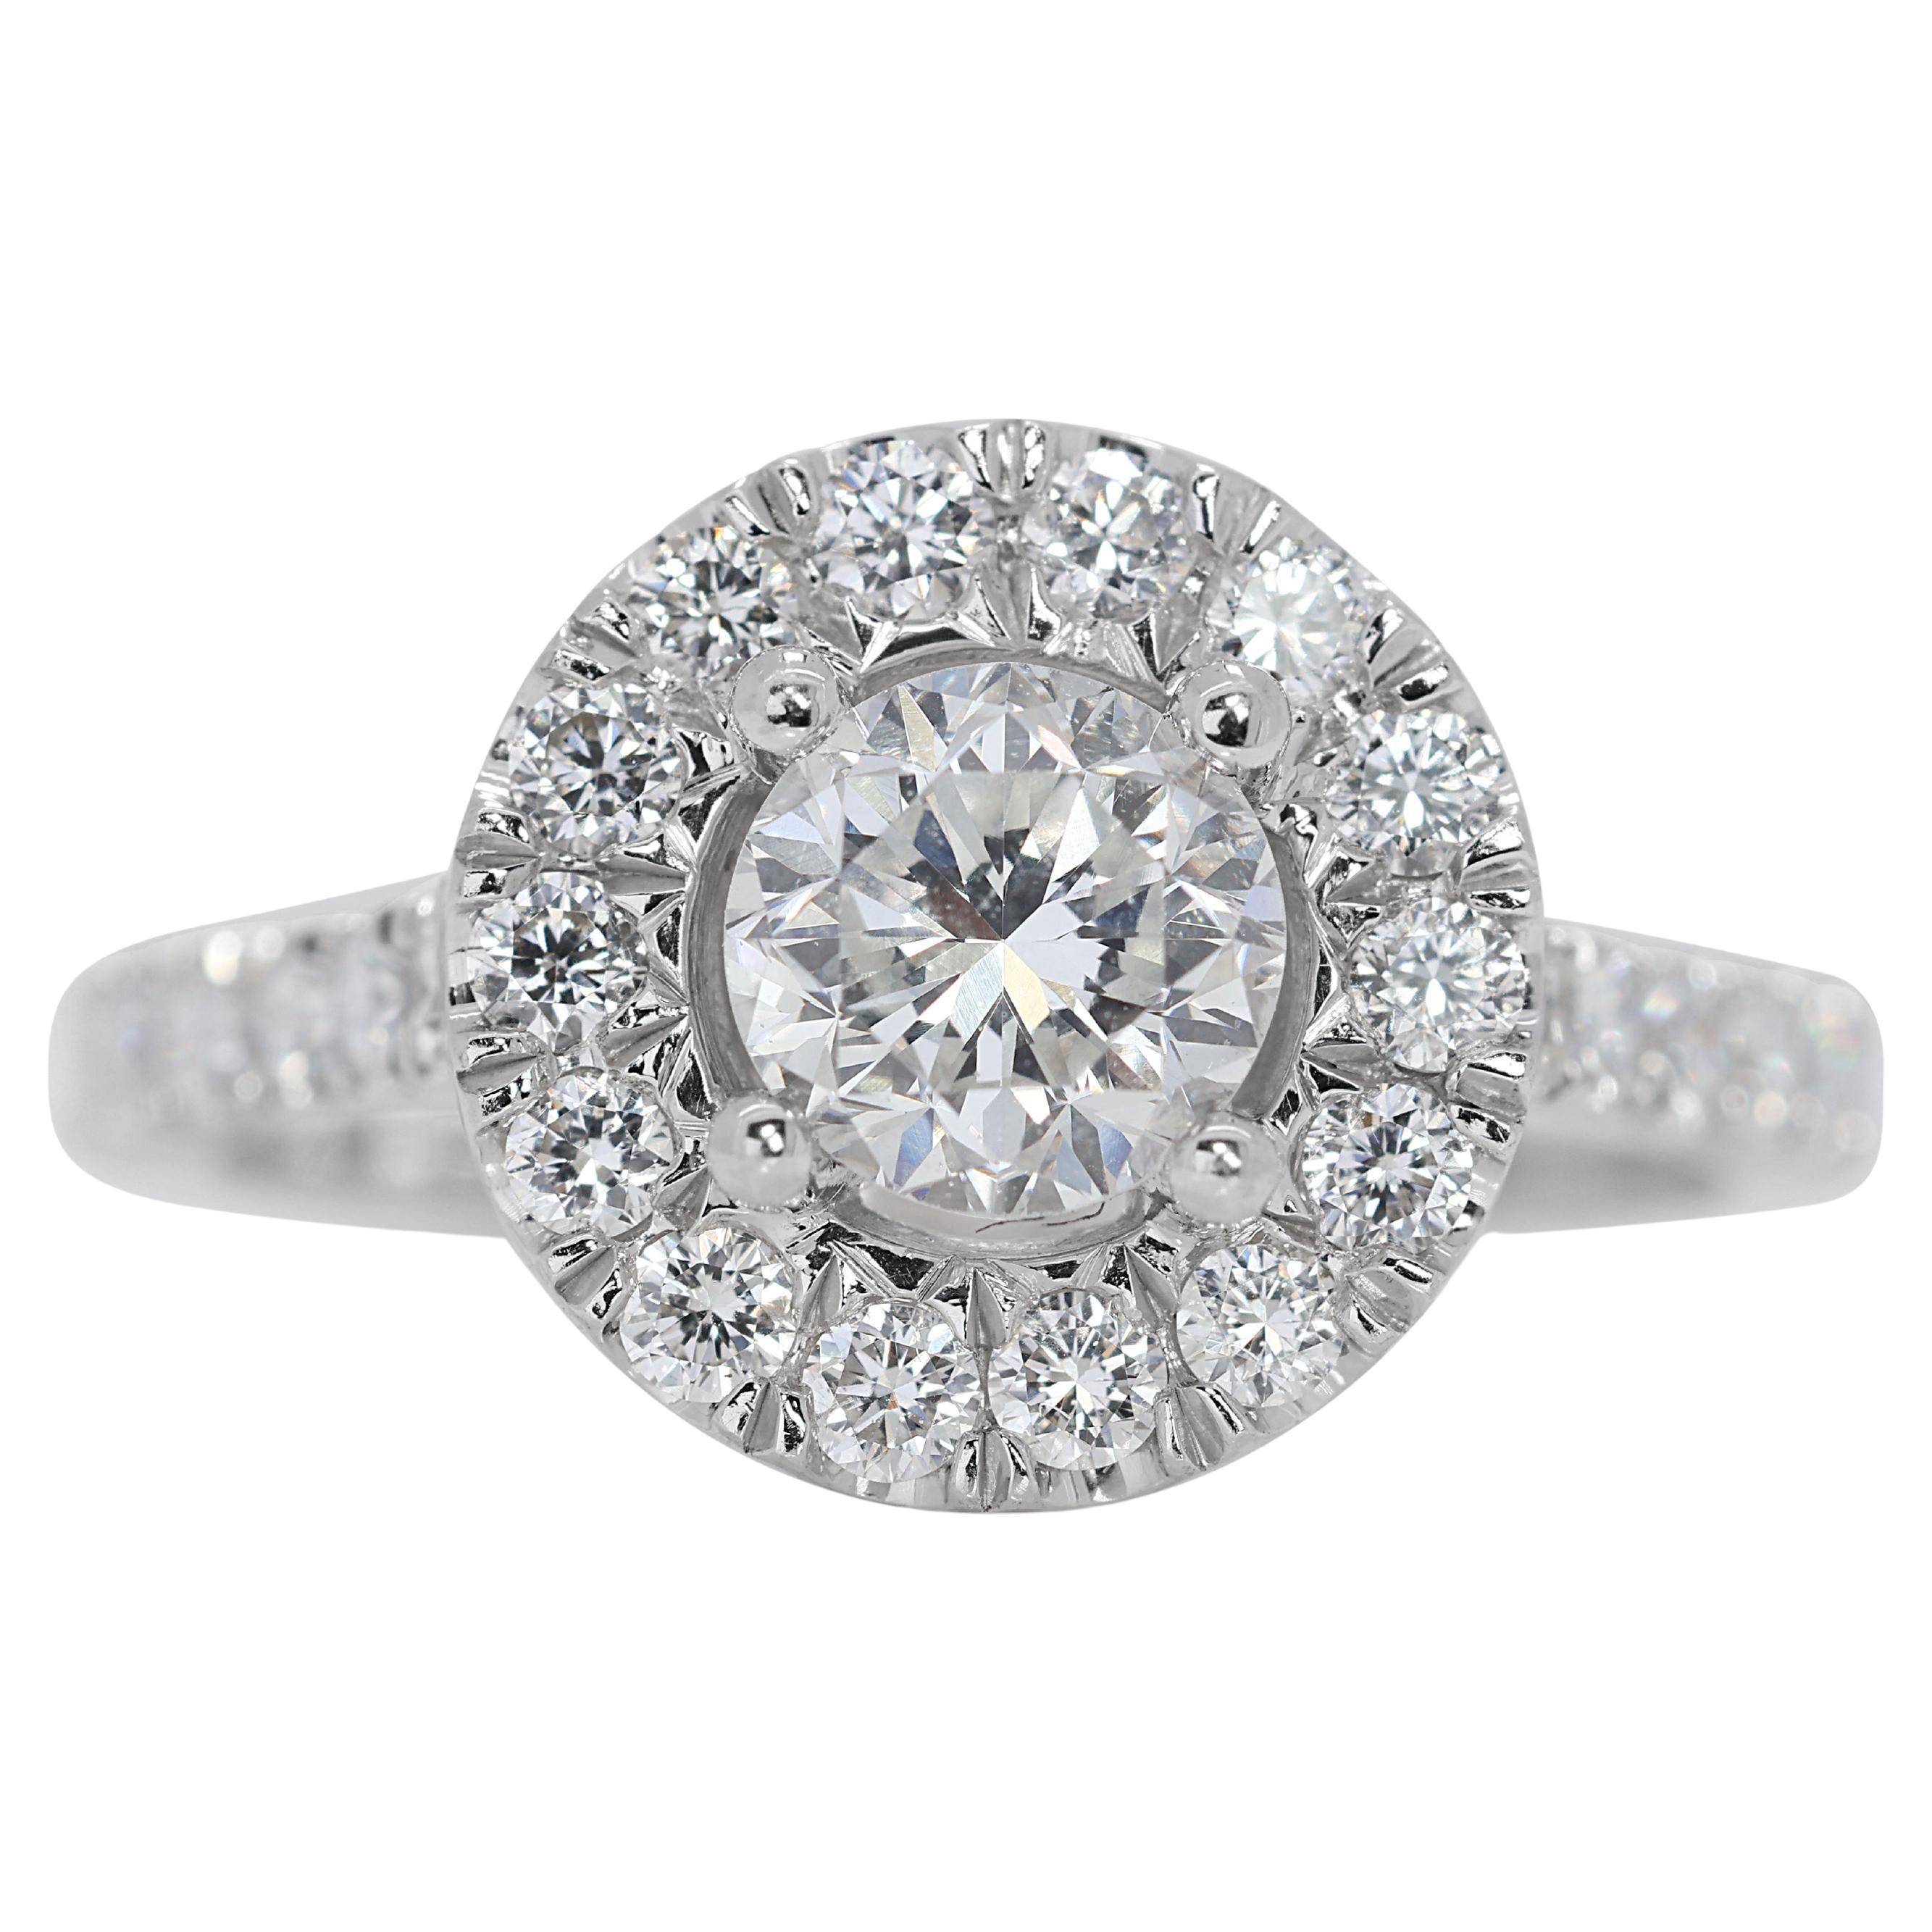 Classic 0.80ct Diamond Pave Ring in 18K White Gold